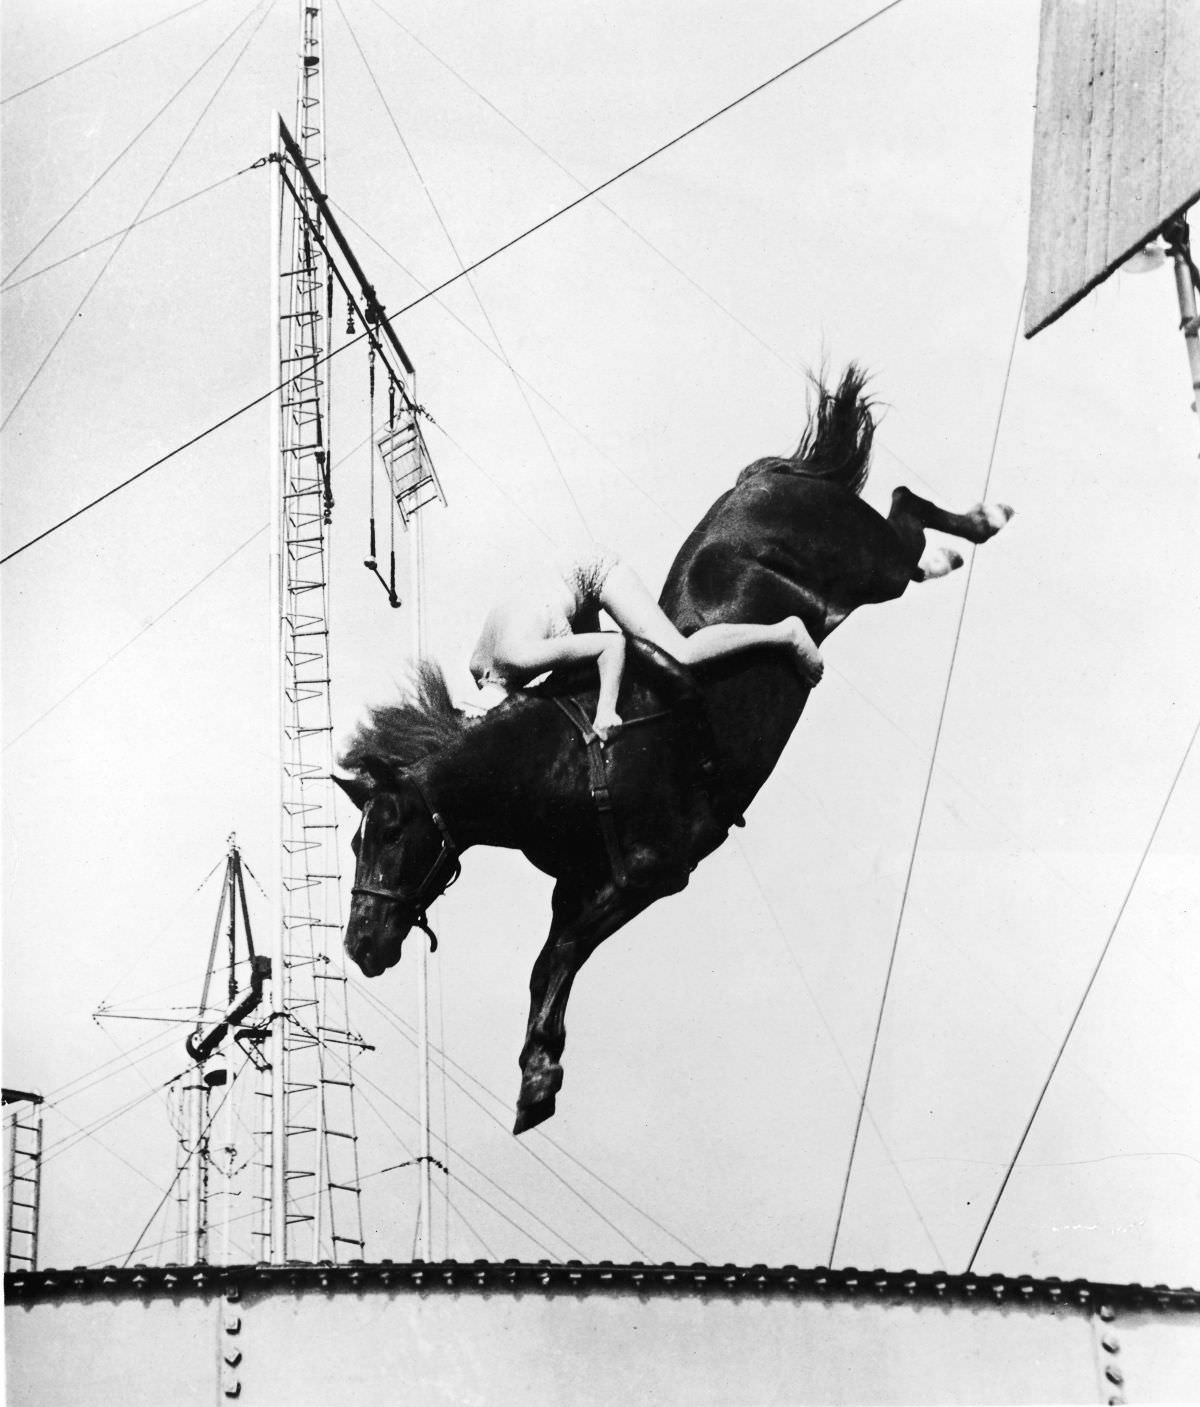 Horse Diving Show: The Most Dangerous And Risky Stunt Show Ever Performed